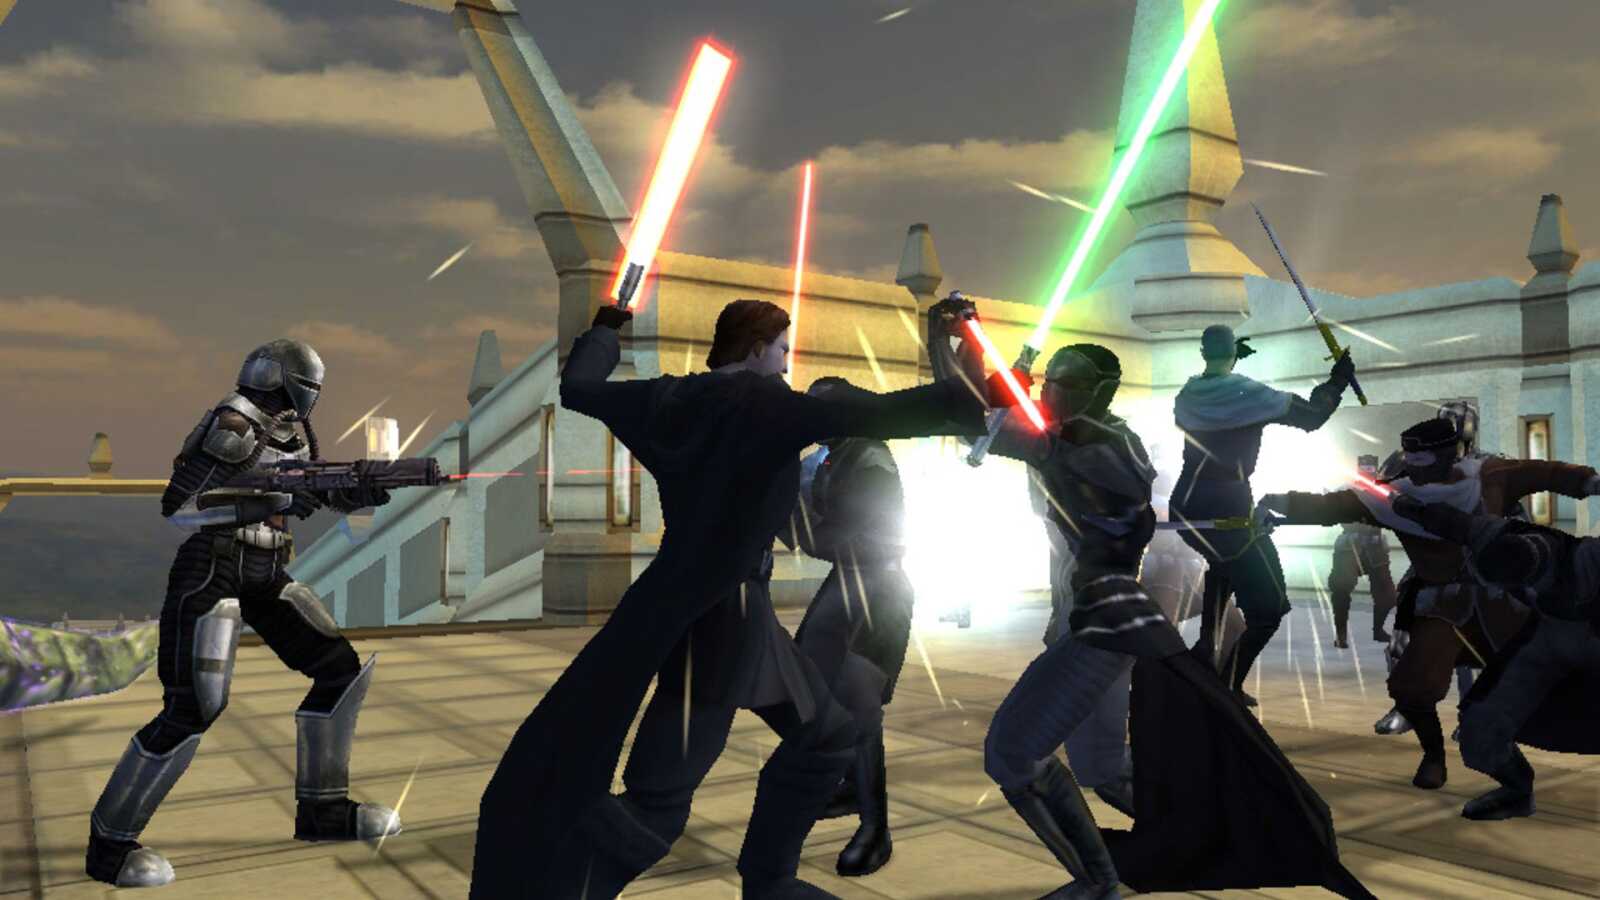 Игра стар варс котор. Star Wars Knights of the old Republic 2. Star Wars: kotor Knights of the old Republic. Star Wars: Knights of the old Republic II – the Sith Lords. Kotor ремейк.